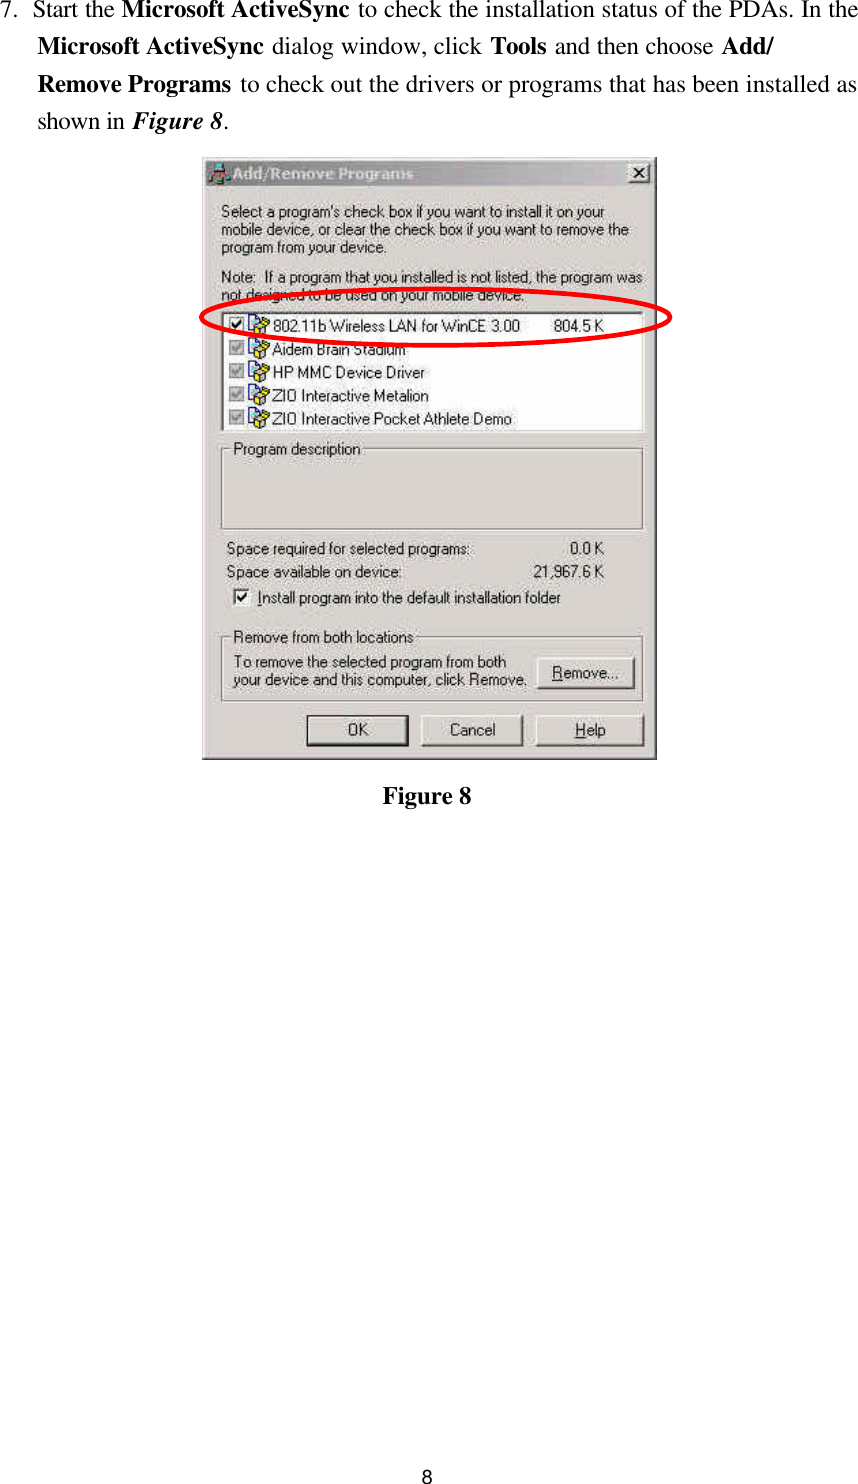  8 7. Start the Microsoft ActiveSync to check the installation status of the PDAs. In the Microsoft ActiveSync dialog window, click Tools and then choose Add/ Remove Programs to check out the drivers or programs that has been installed as shown in Figure 8.  Figure 8                 